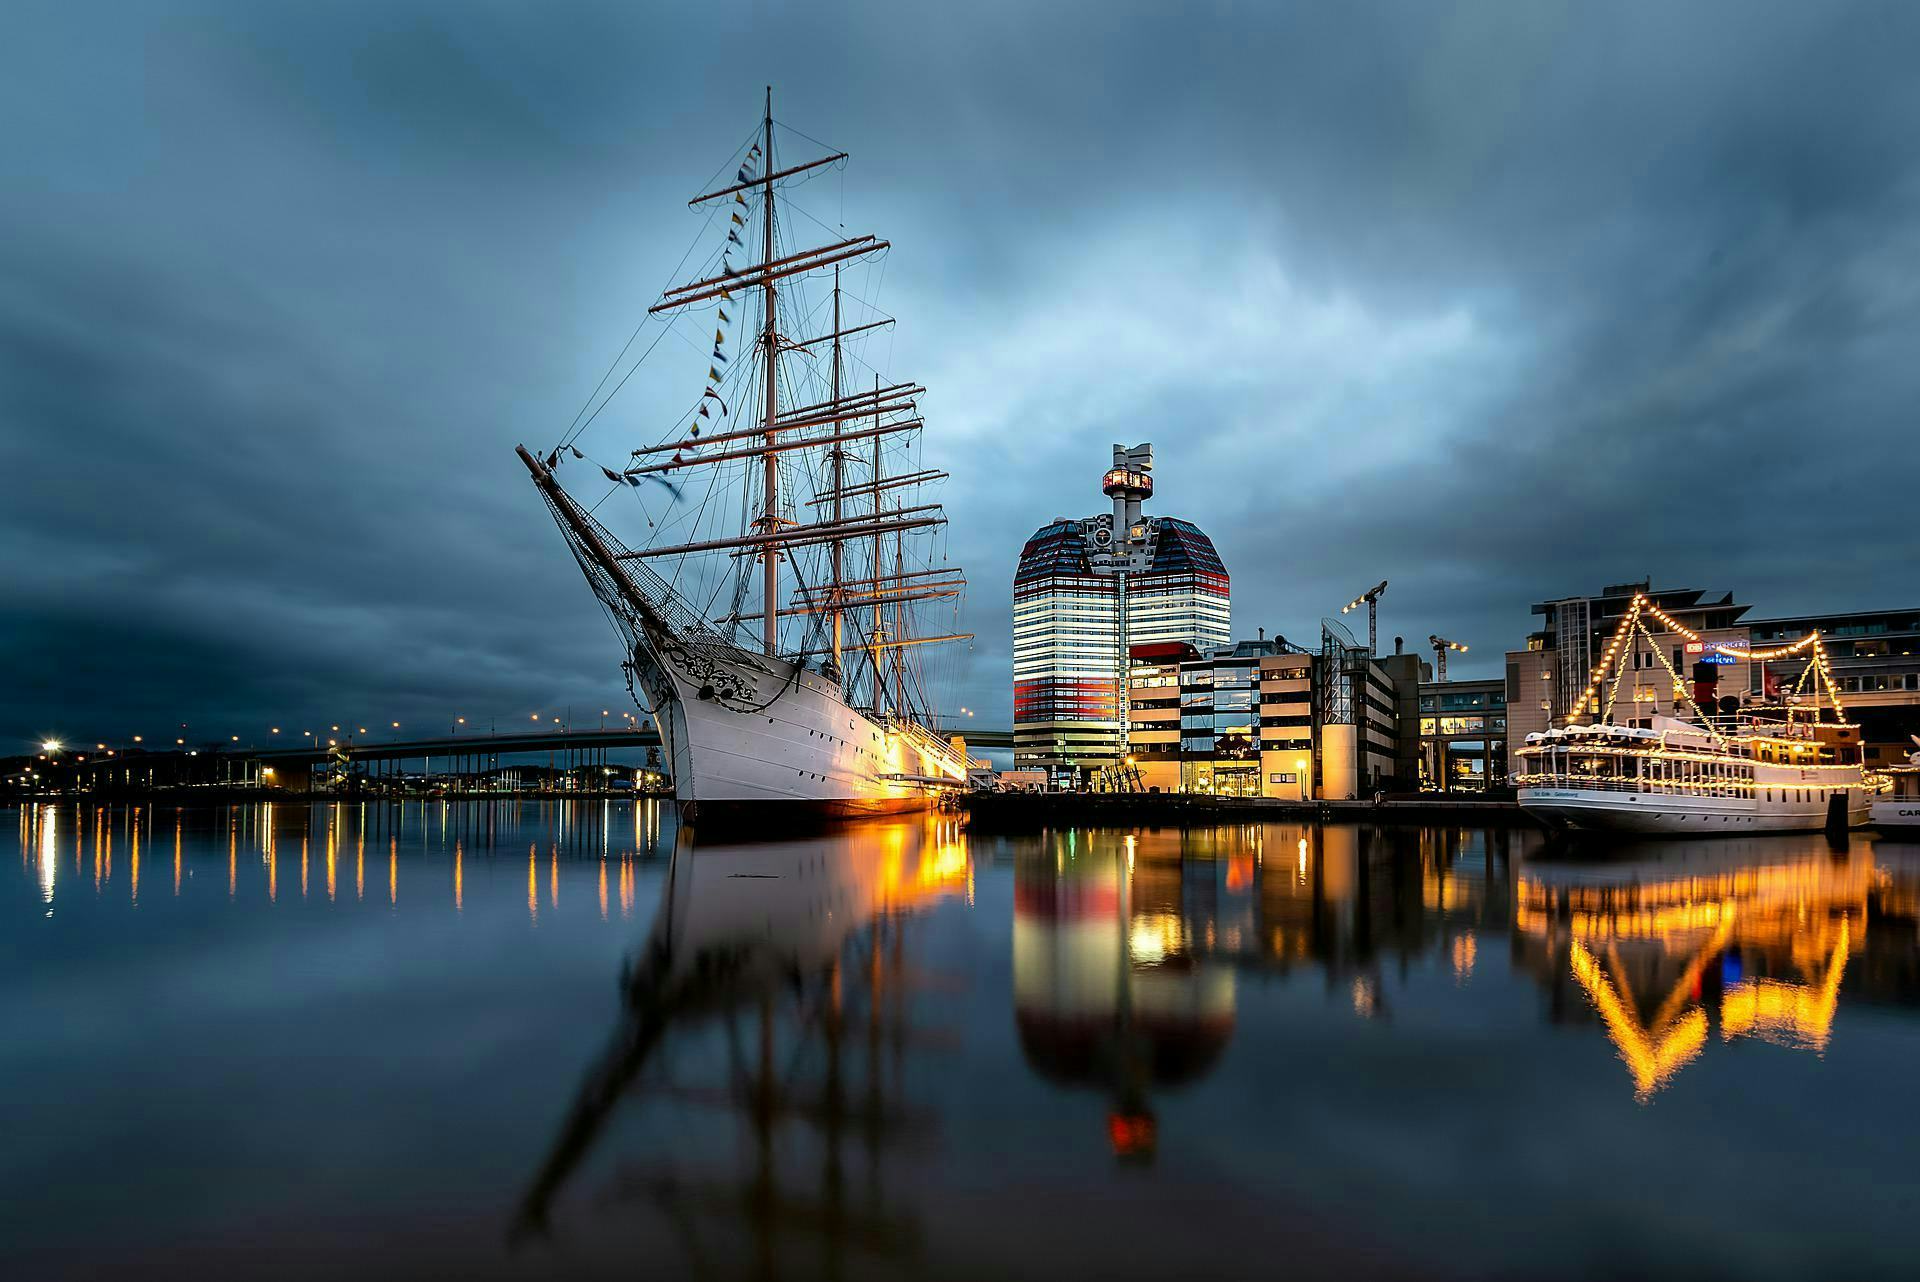 An old ship moored in Gothenburg at night